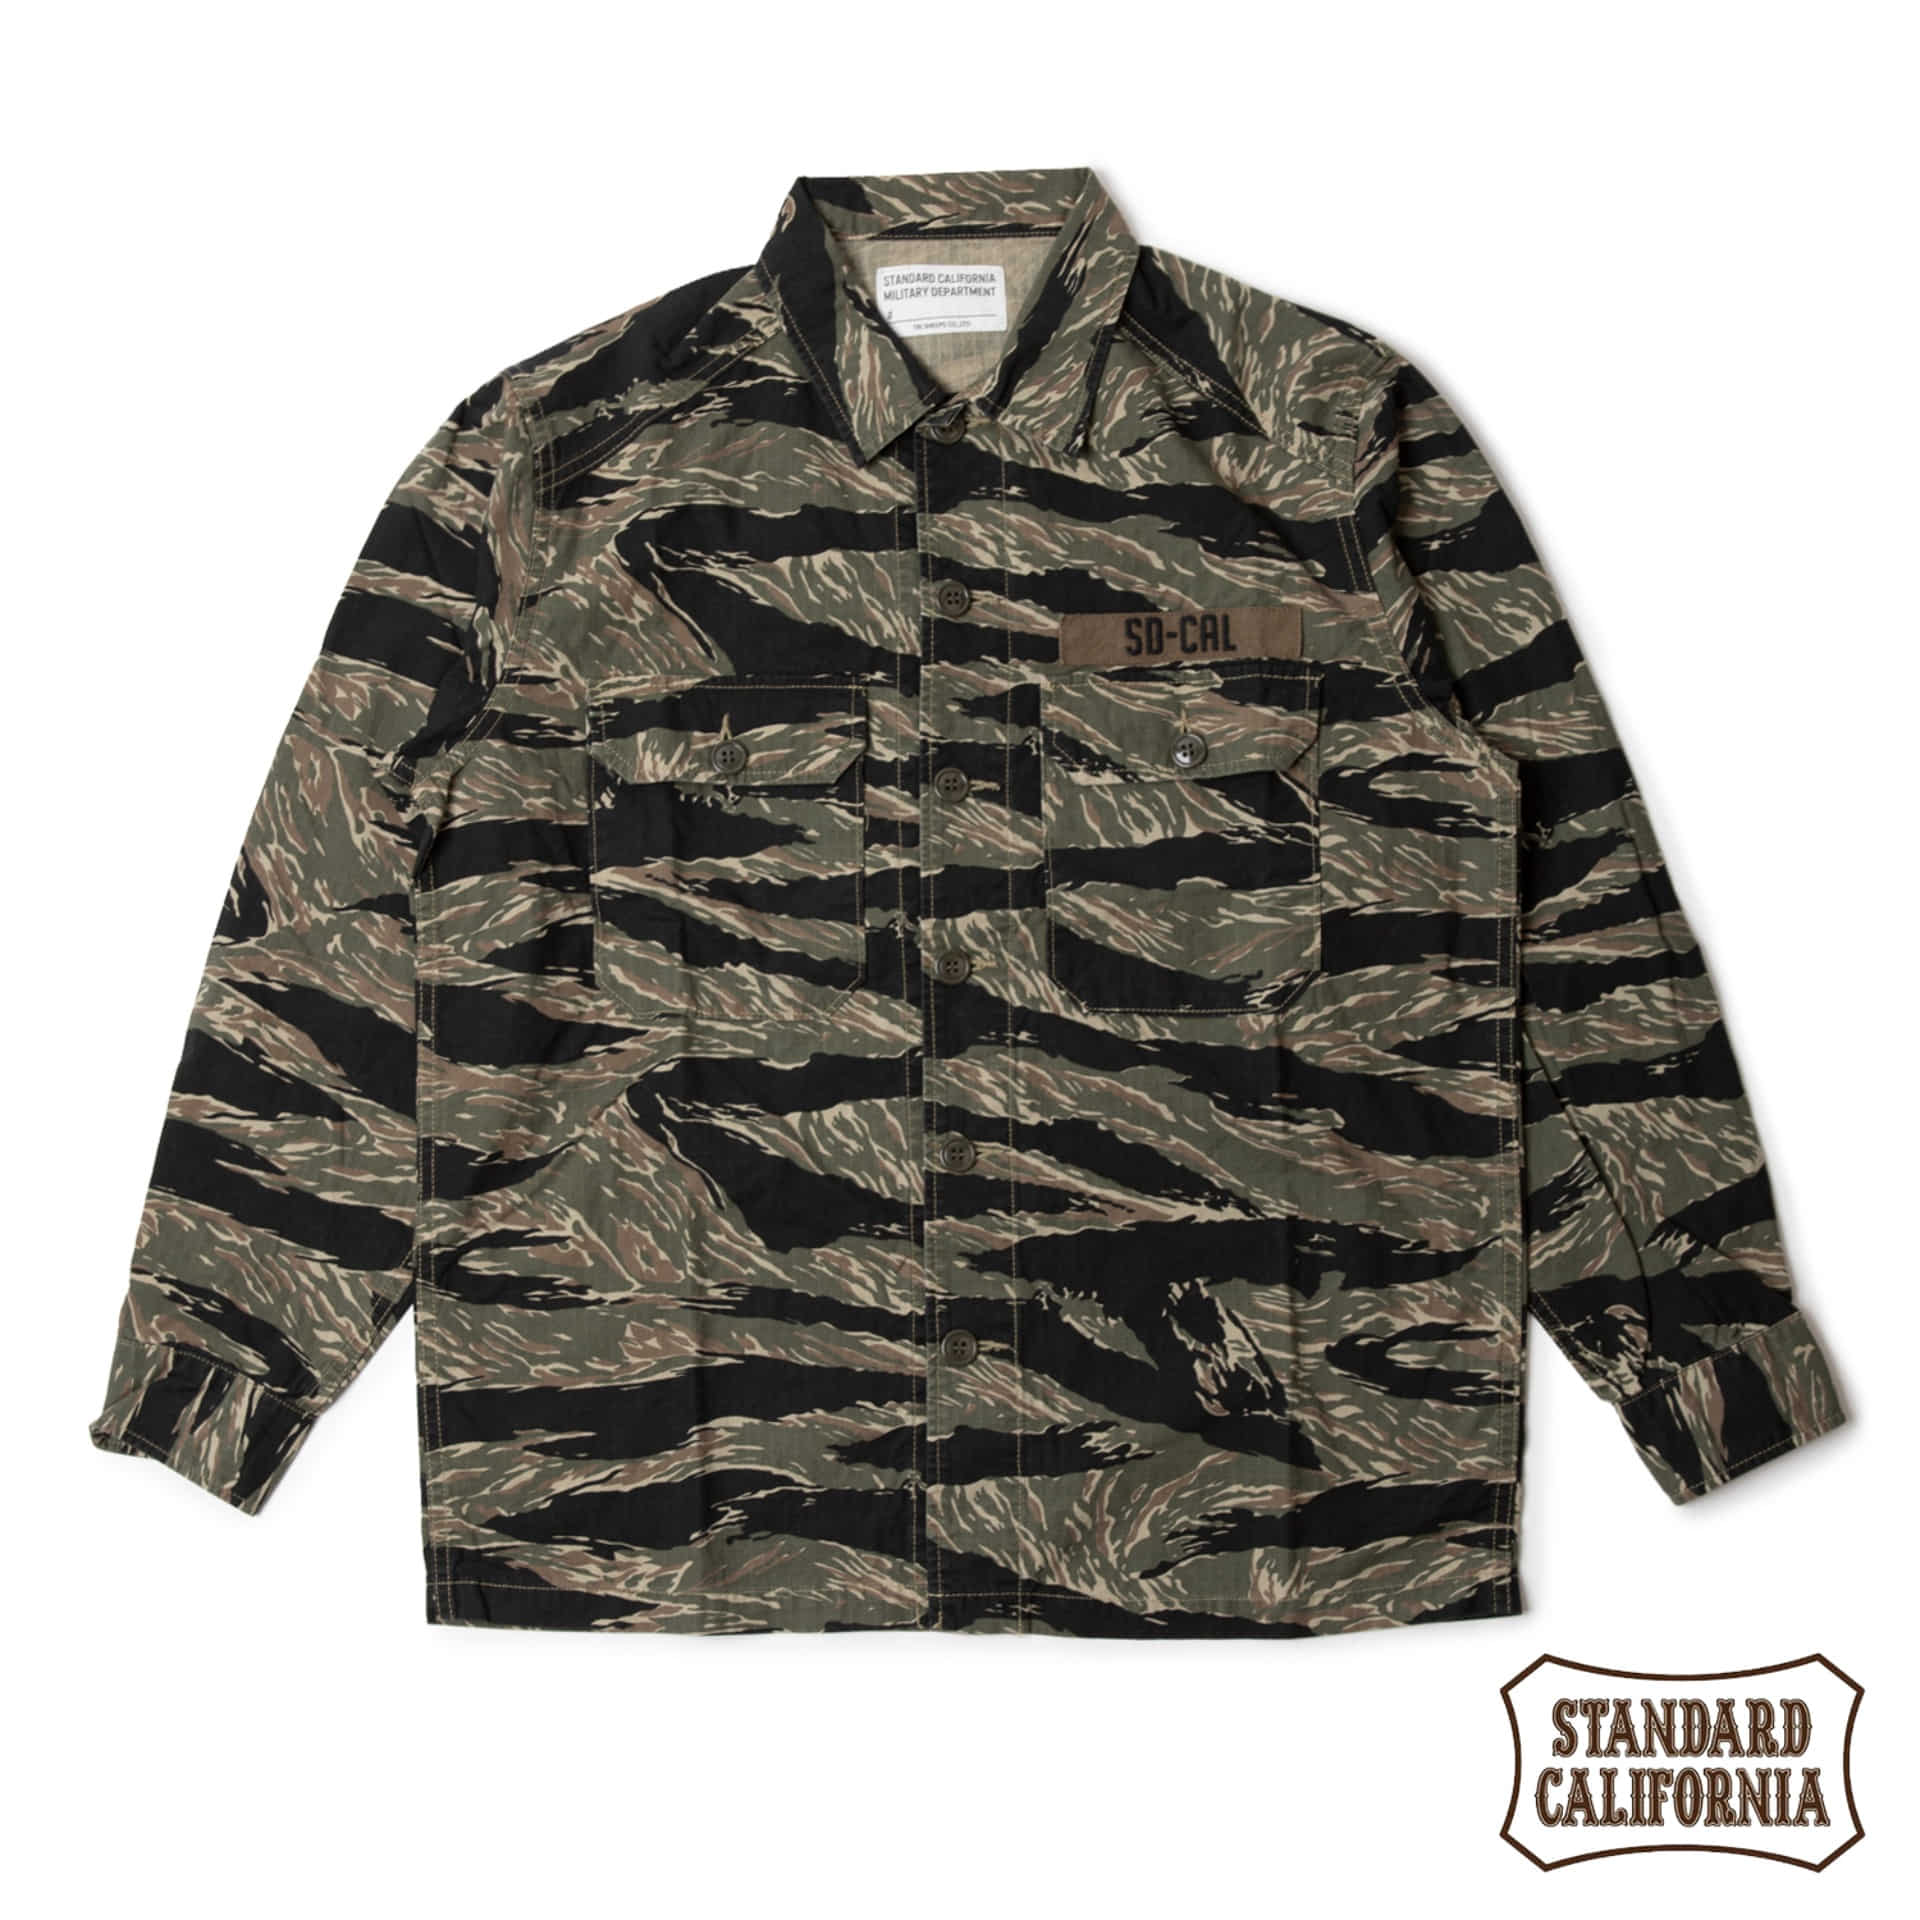 SD RIPSTOP ARMY SHIRT (Camouflage)